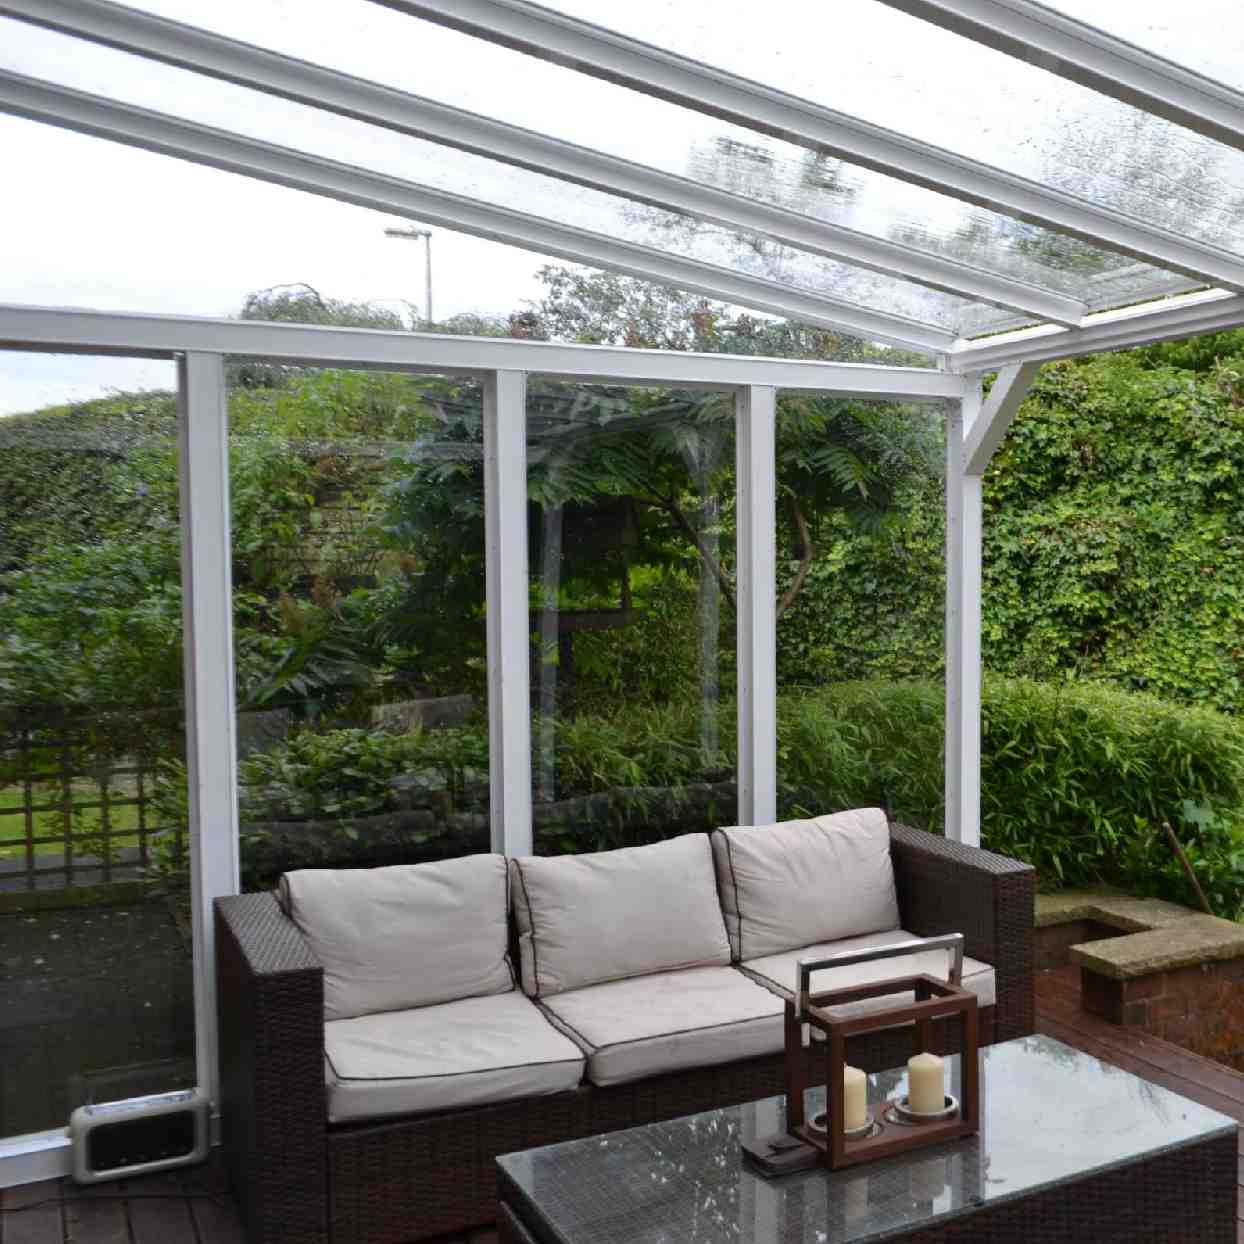 Buy Omega Verandah White with 16mm Polycarbonate Glazing - 11.6m (W) x 1.5m (P), (5) Supporting Posts online today